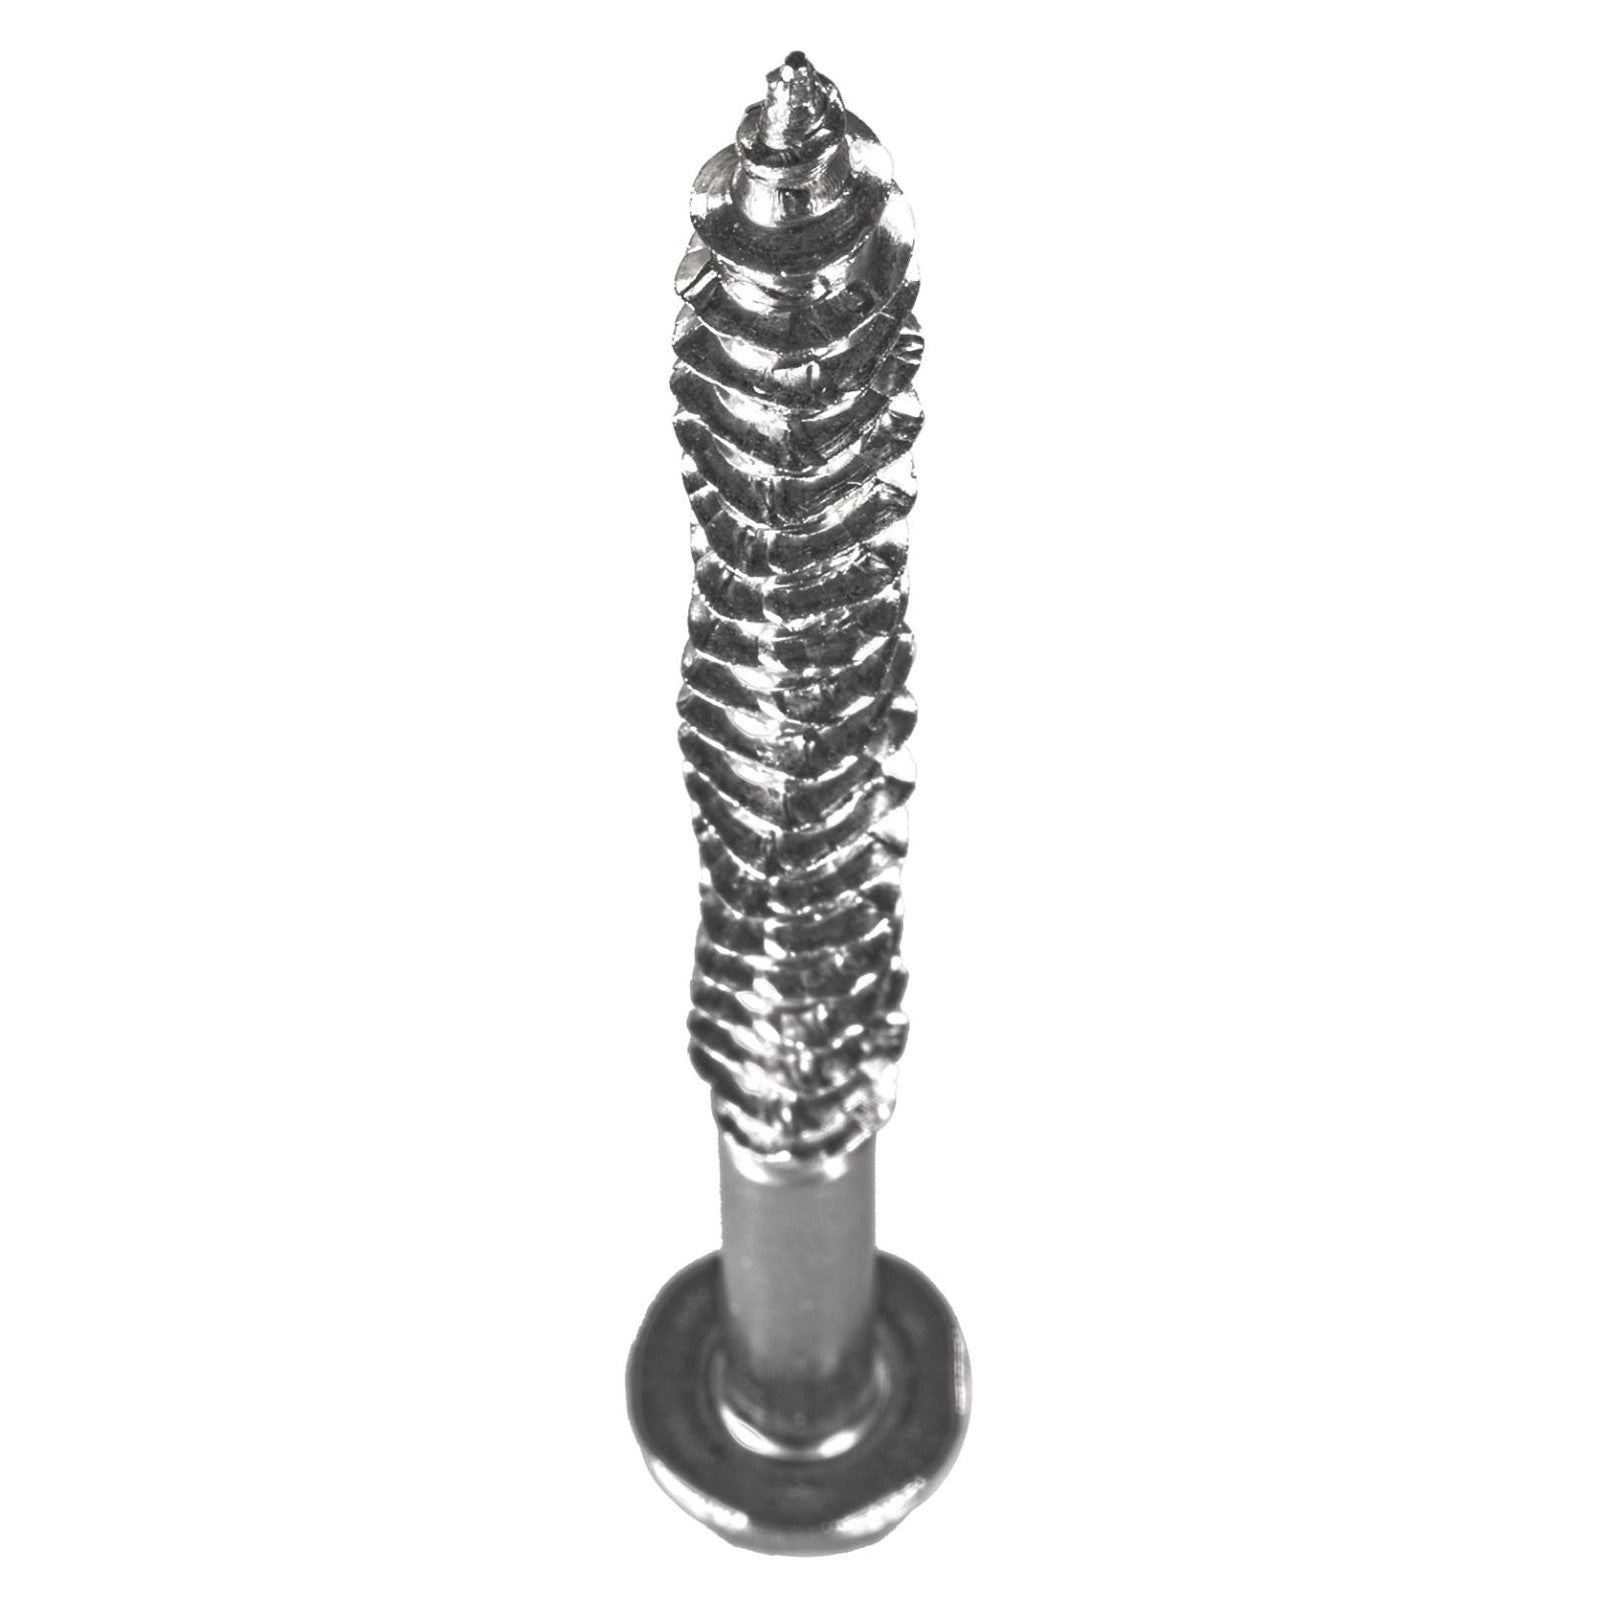 0188 inch x 5 inch StrongTie SDWH TimberHex Screw 316 Stainless Steel Pkg 10 image 1 of 3 image 2 of 3 image 3 of 3